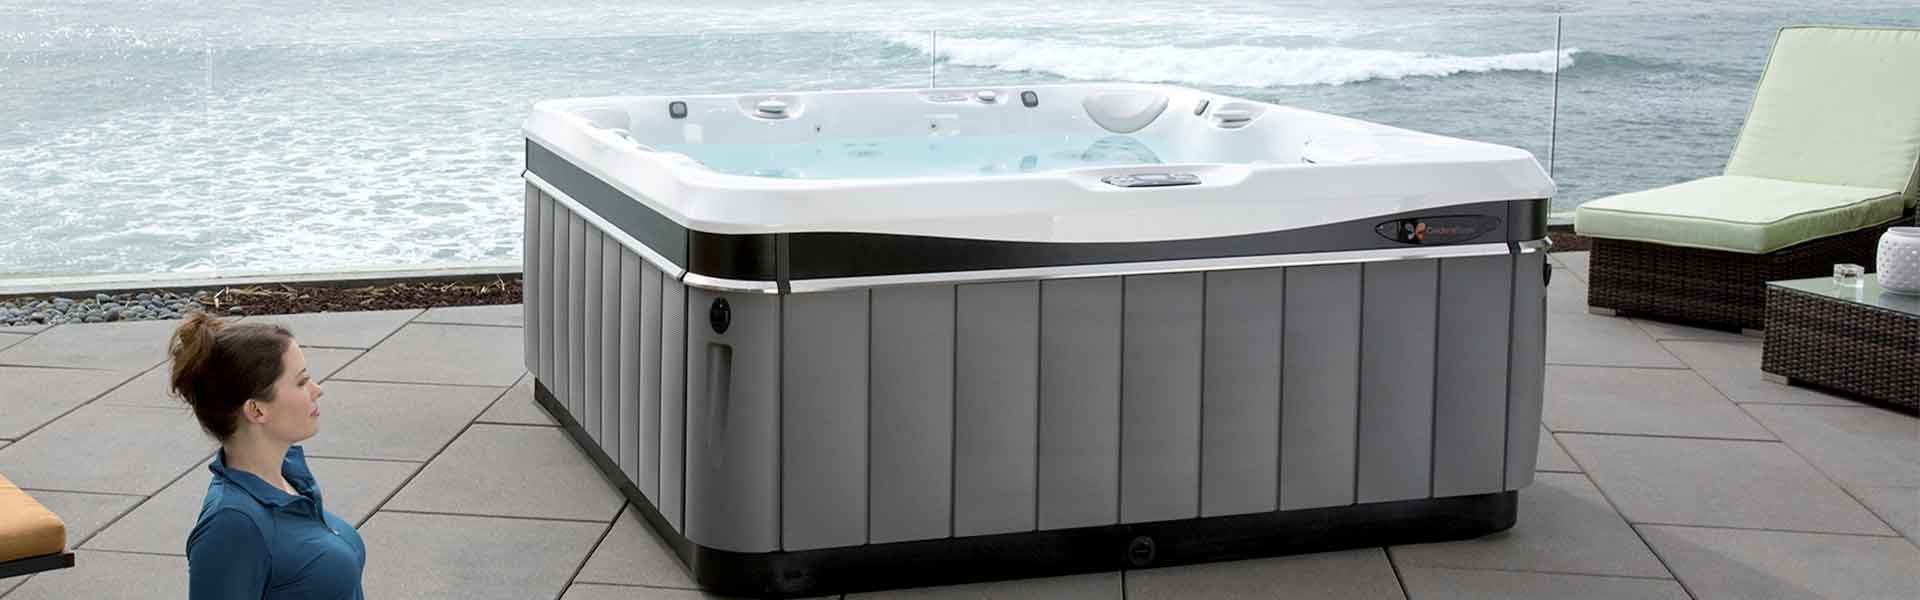 7 Ways a Hot Tub Can Change Your Life